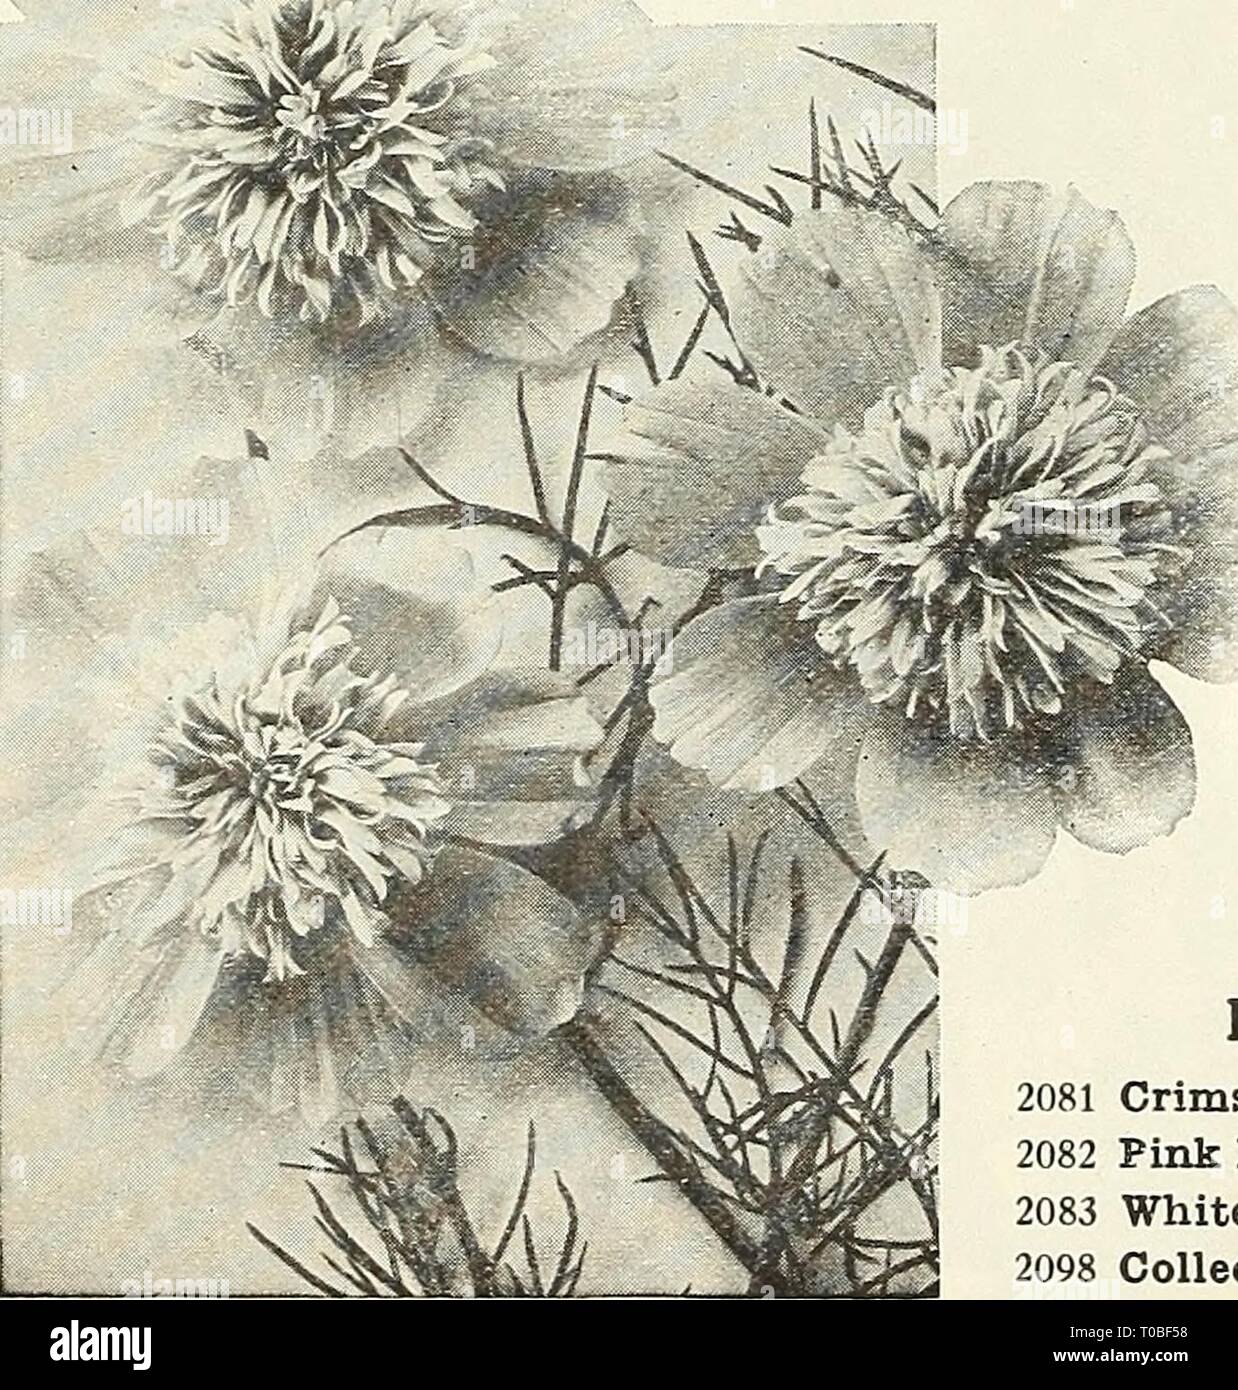 Dreer's garden book 1928 (1928) Dreer's garden book 1928 dreersgardenbook1928henr Year: 1928  Coreopsis Lanceolata Grandiflora Fl. Pl.    Early Double-flowertng Cosmos Cynoglossum Amabile (Chinese Forget-me-not) 2148 An annual recently introduced from China; of the easiest culture, forming strong plants about 18 inches high and producing through the summer months sprays of intense blue Forget-me-not-like flowers. A splendid addition to the comparatively short list of real blue flowers. Offered last year for the first time and have received numerous favorable reports. 15 cts. per pkt.; 40 cts.  Stock Photo